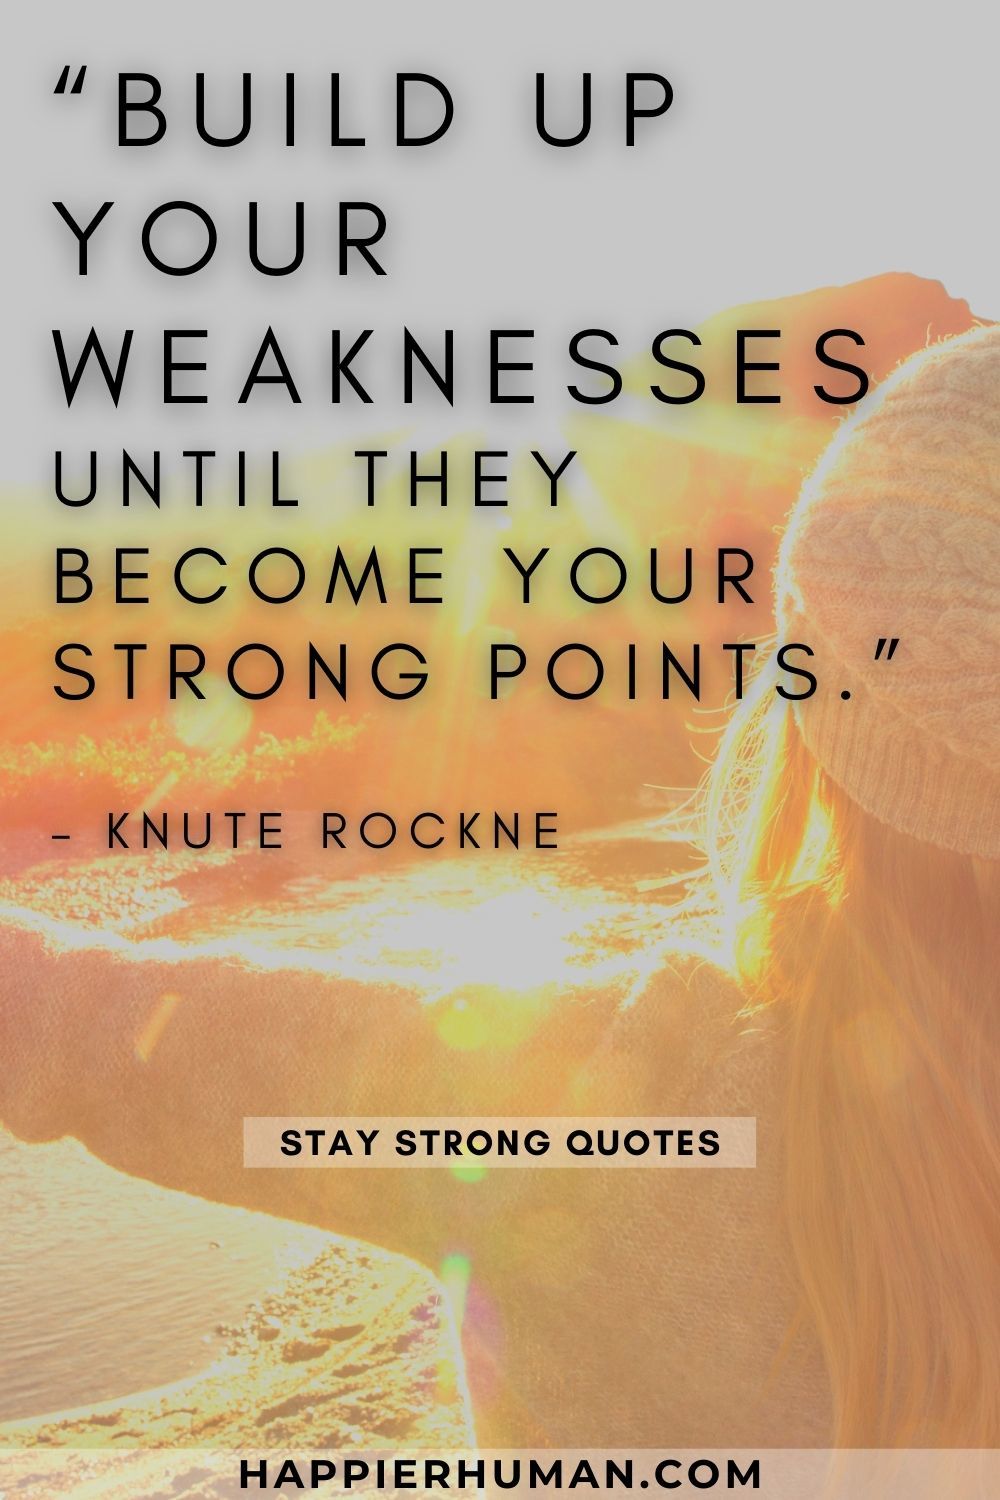 “Build up your weaknesses until they become your strong points.” – Knute Rockne | dear self stay strong quotes | gotta stay strong quotes